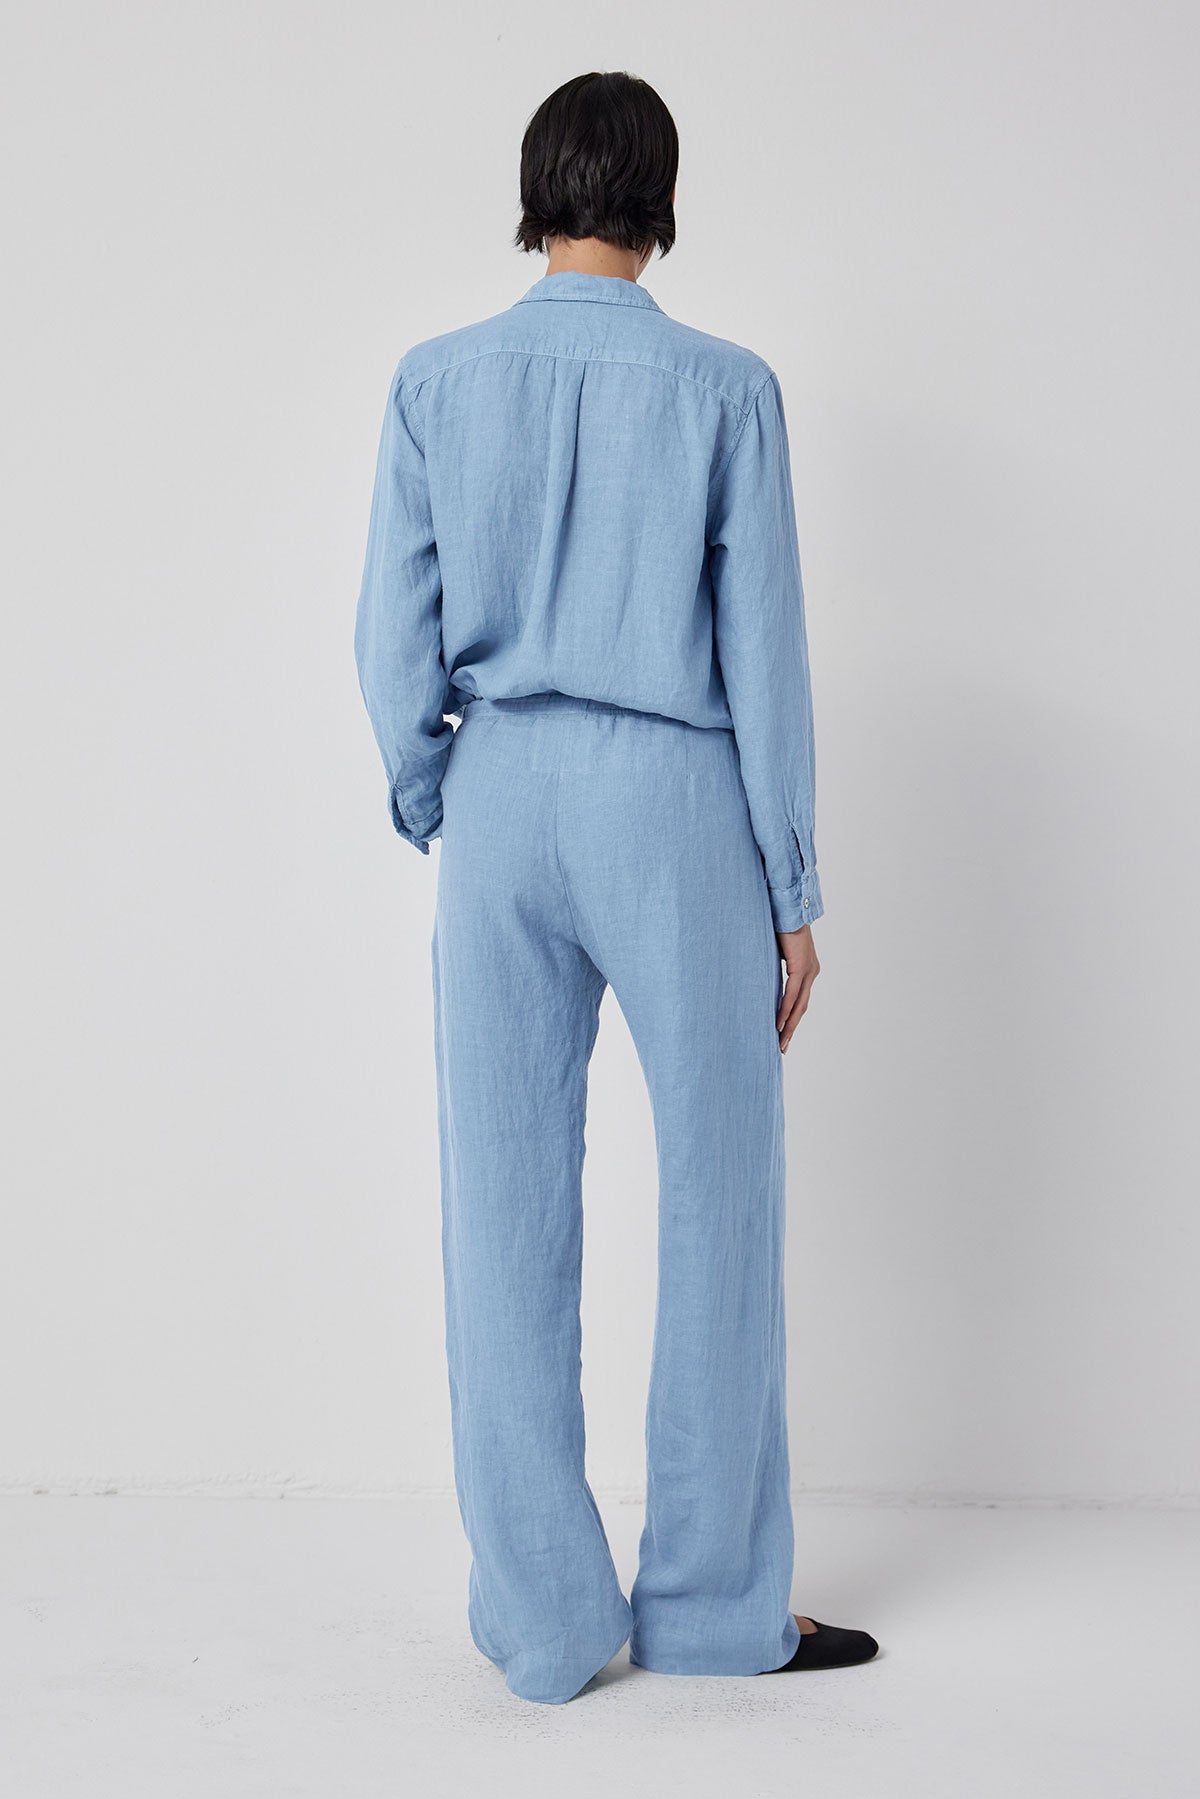   Woman standing with her back to the camera wearing a blue jumpsuit with relaxed fit Pico pants by Velvet by Jenny Graham. 